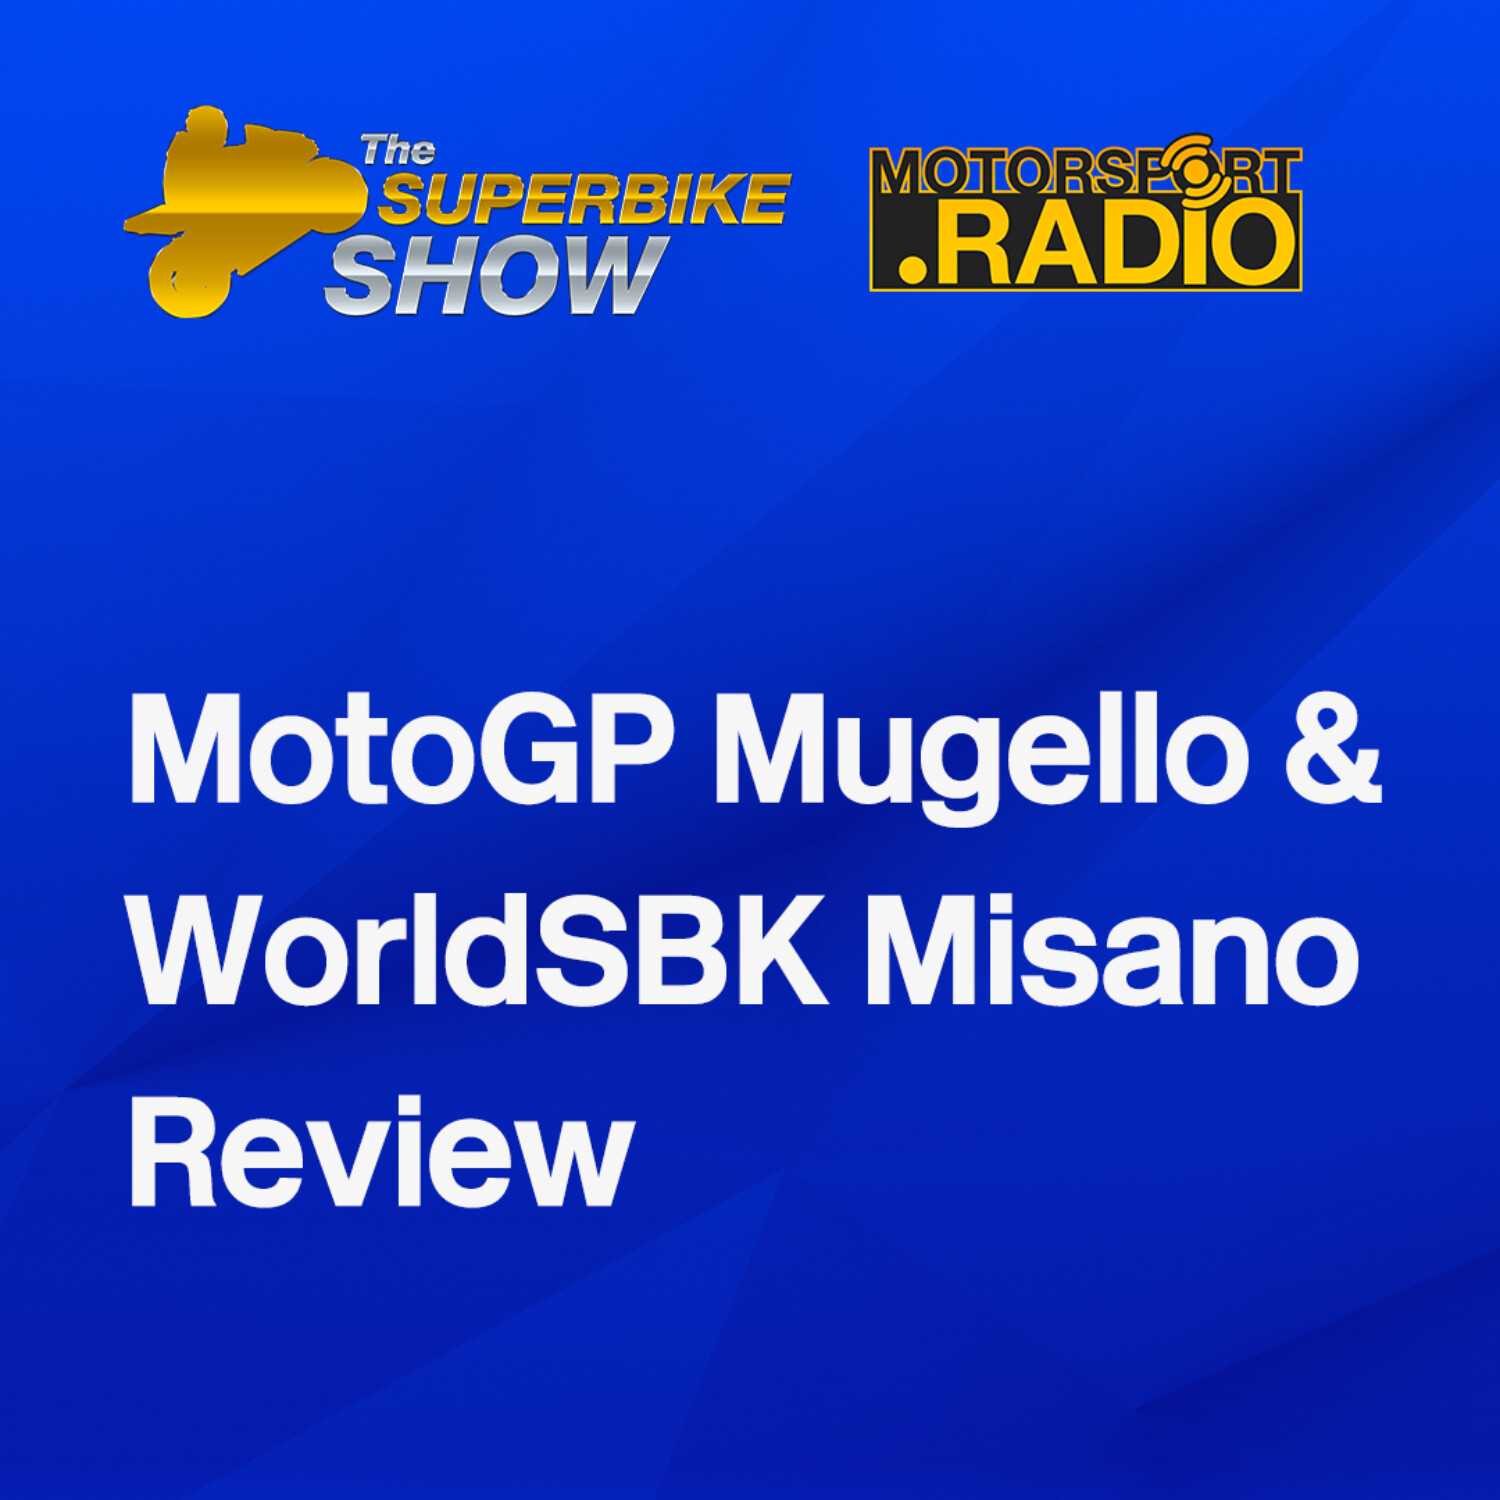 The Superbike Show #MotoGP #ItalianGP Preview and #EmiliaRomagnaWorldSBK review